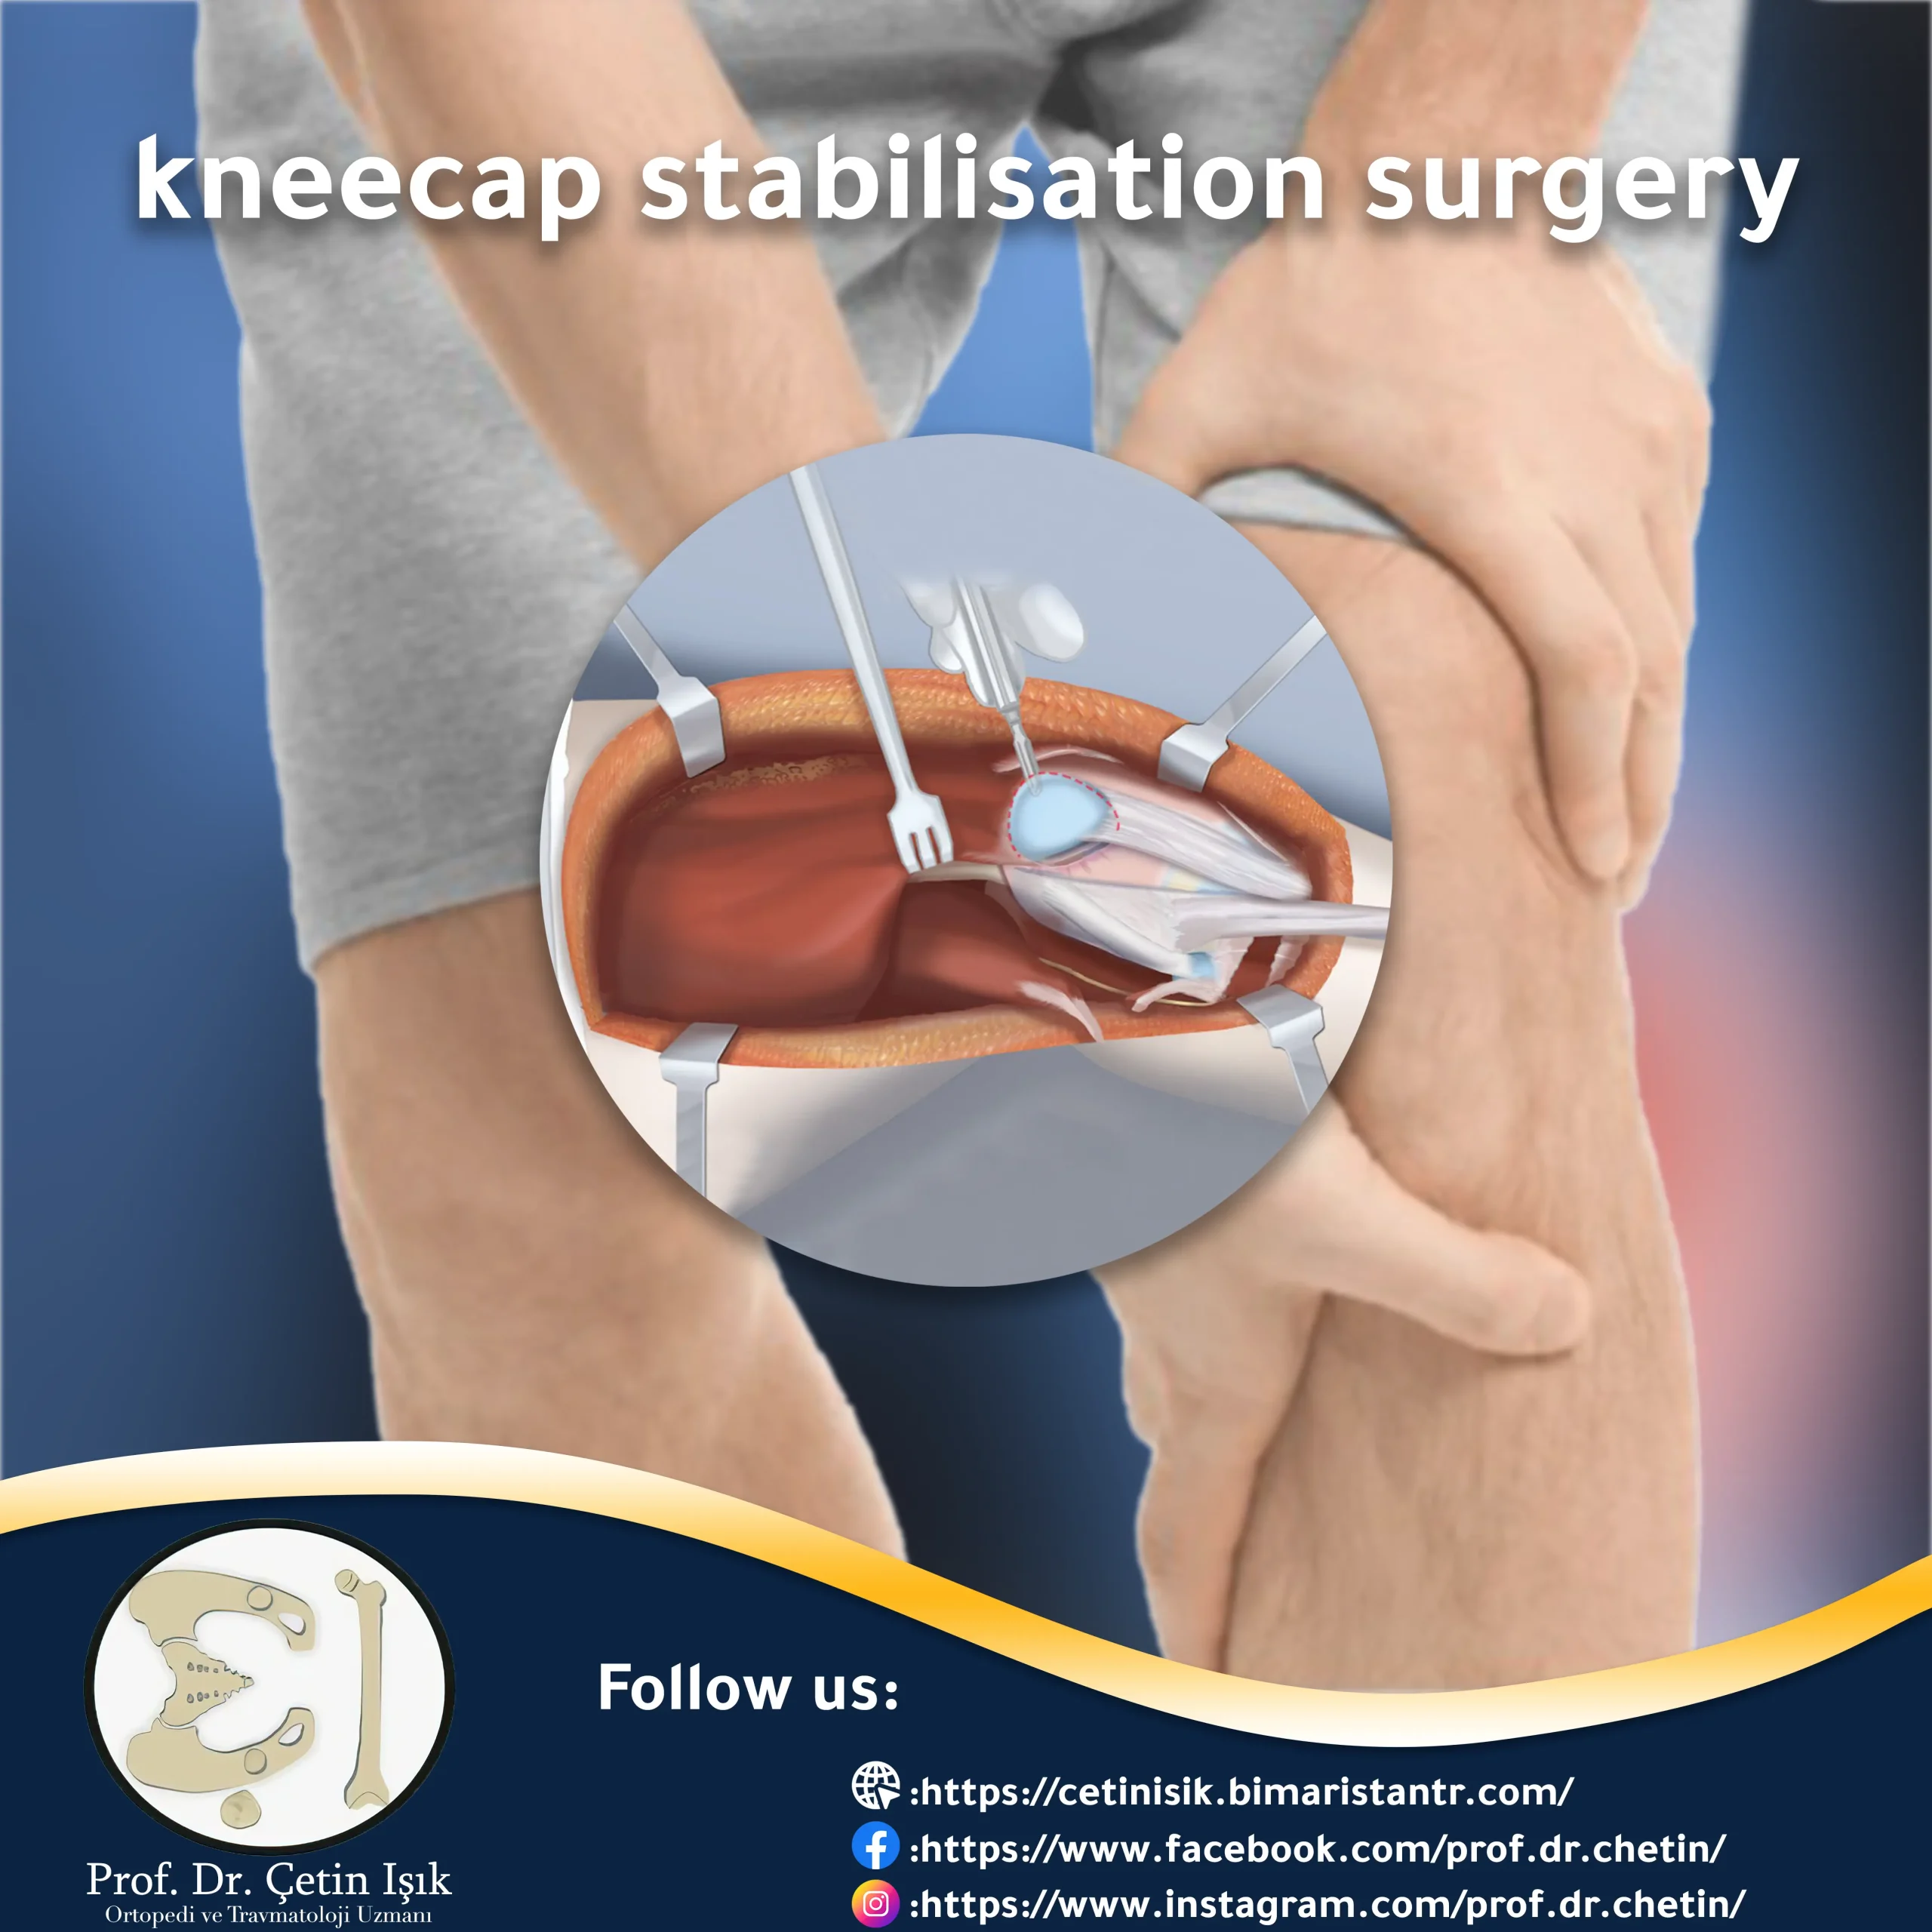 Cover image of the kneecap stabilisation surgery article